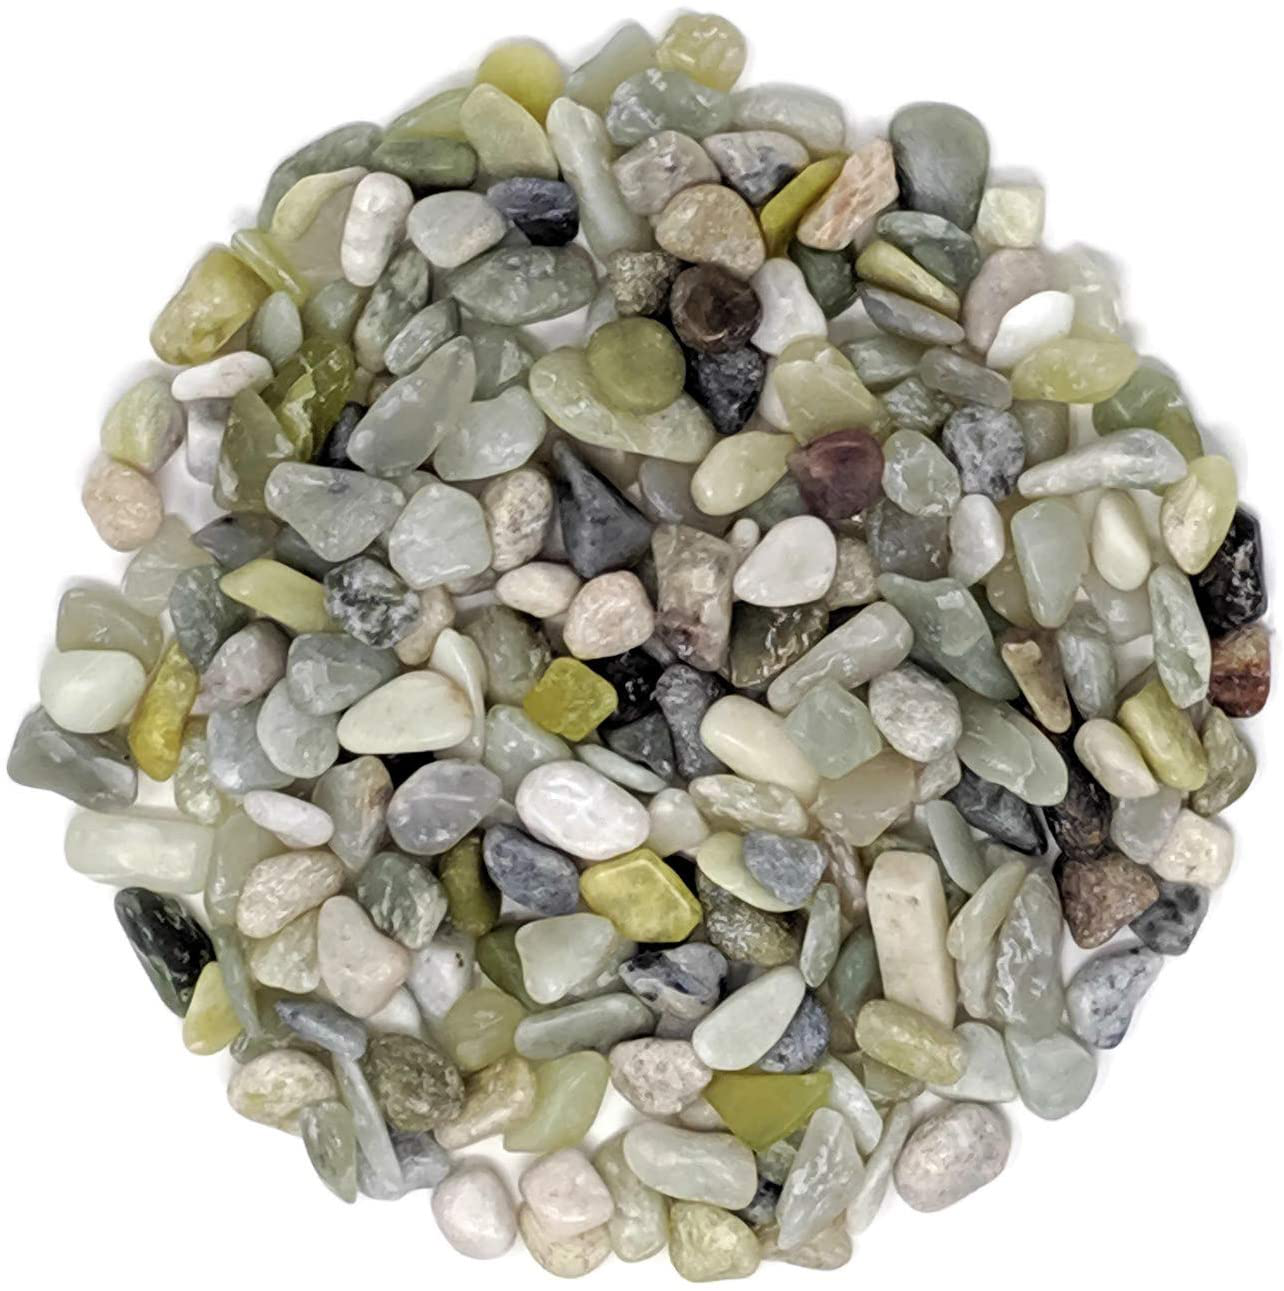 Midwest Hearth Natural Decorative Polished Jade Pebbles 3/8" Gravel Size (5-Lb Bag) Animals & Pet Supplies > Pet Supplies > Fish Supplies > Aquarium Gravel & Substrates Midwest Hearth   